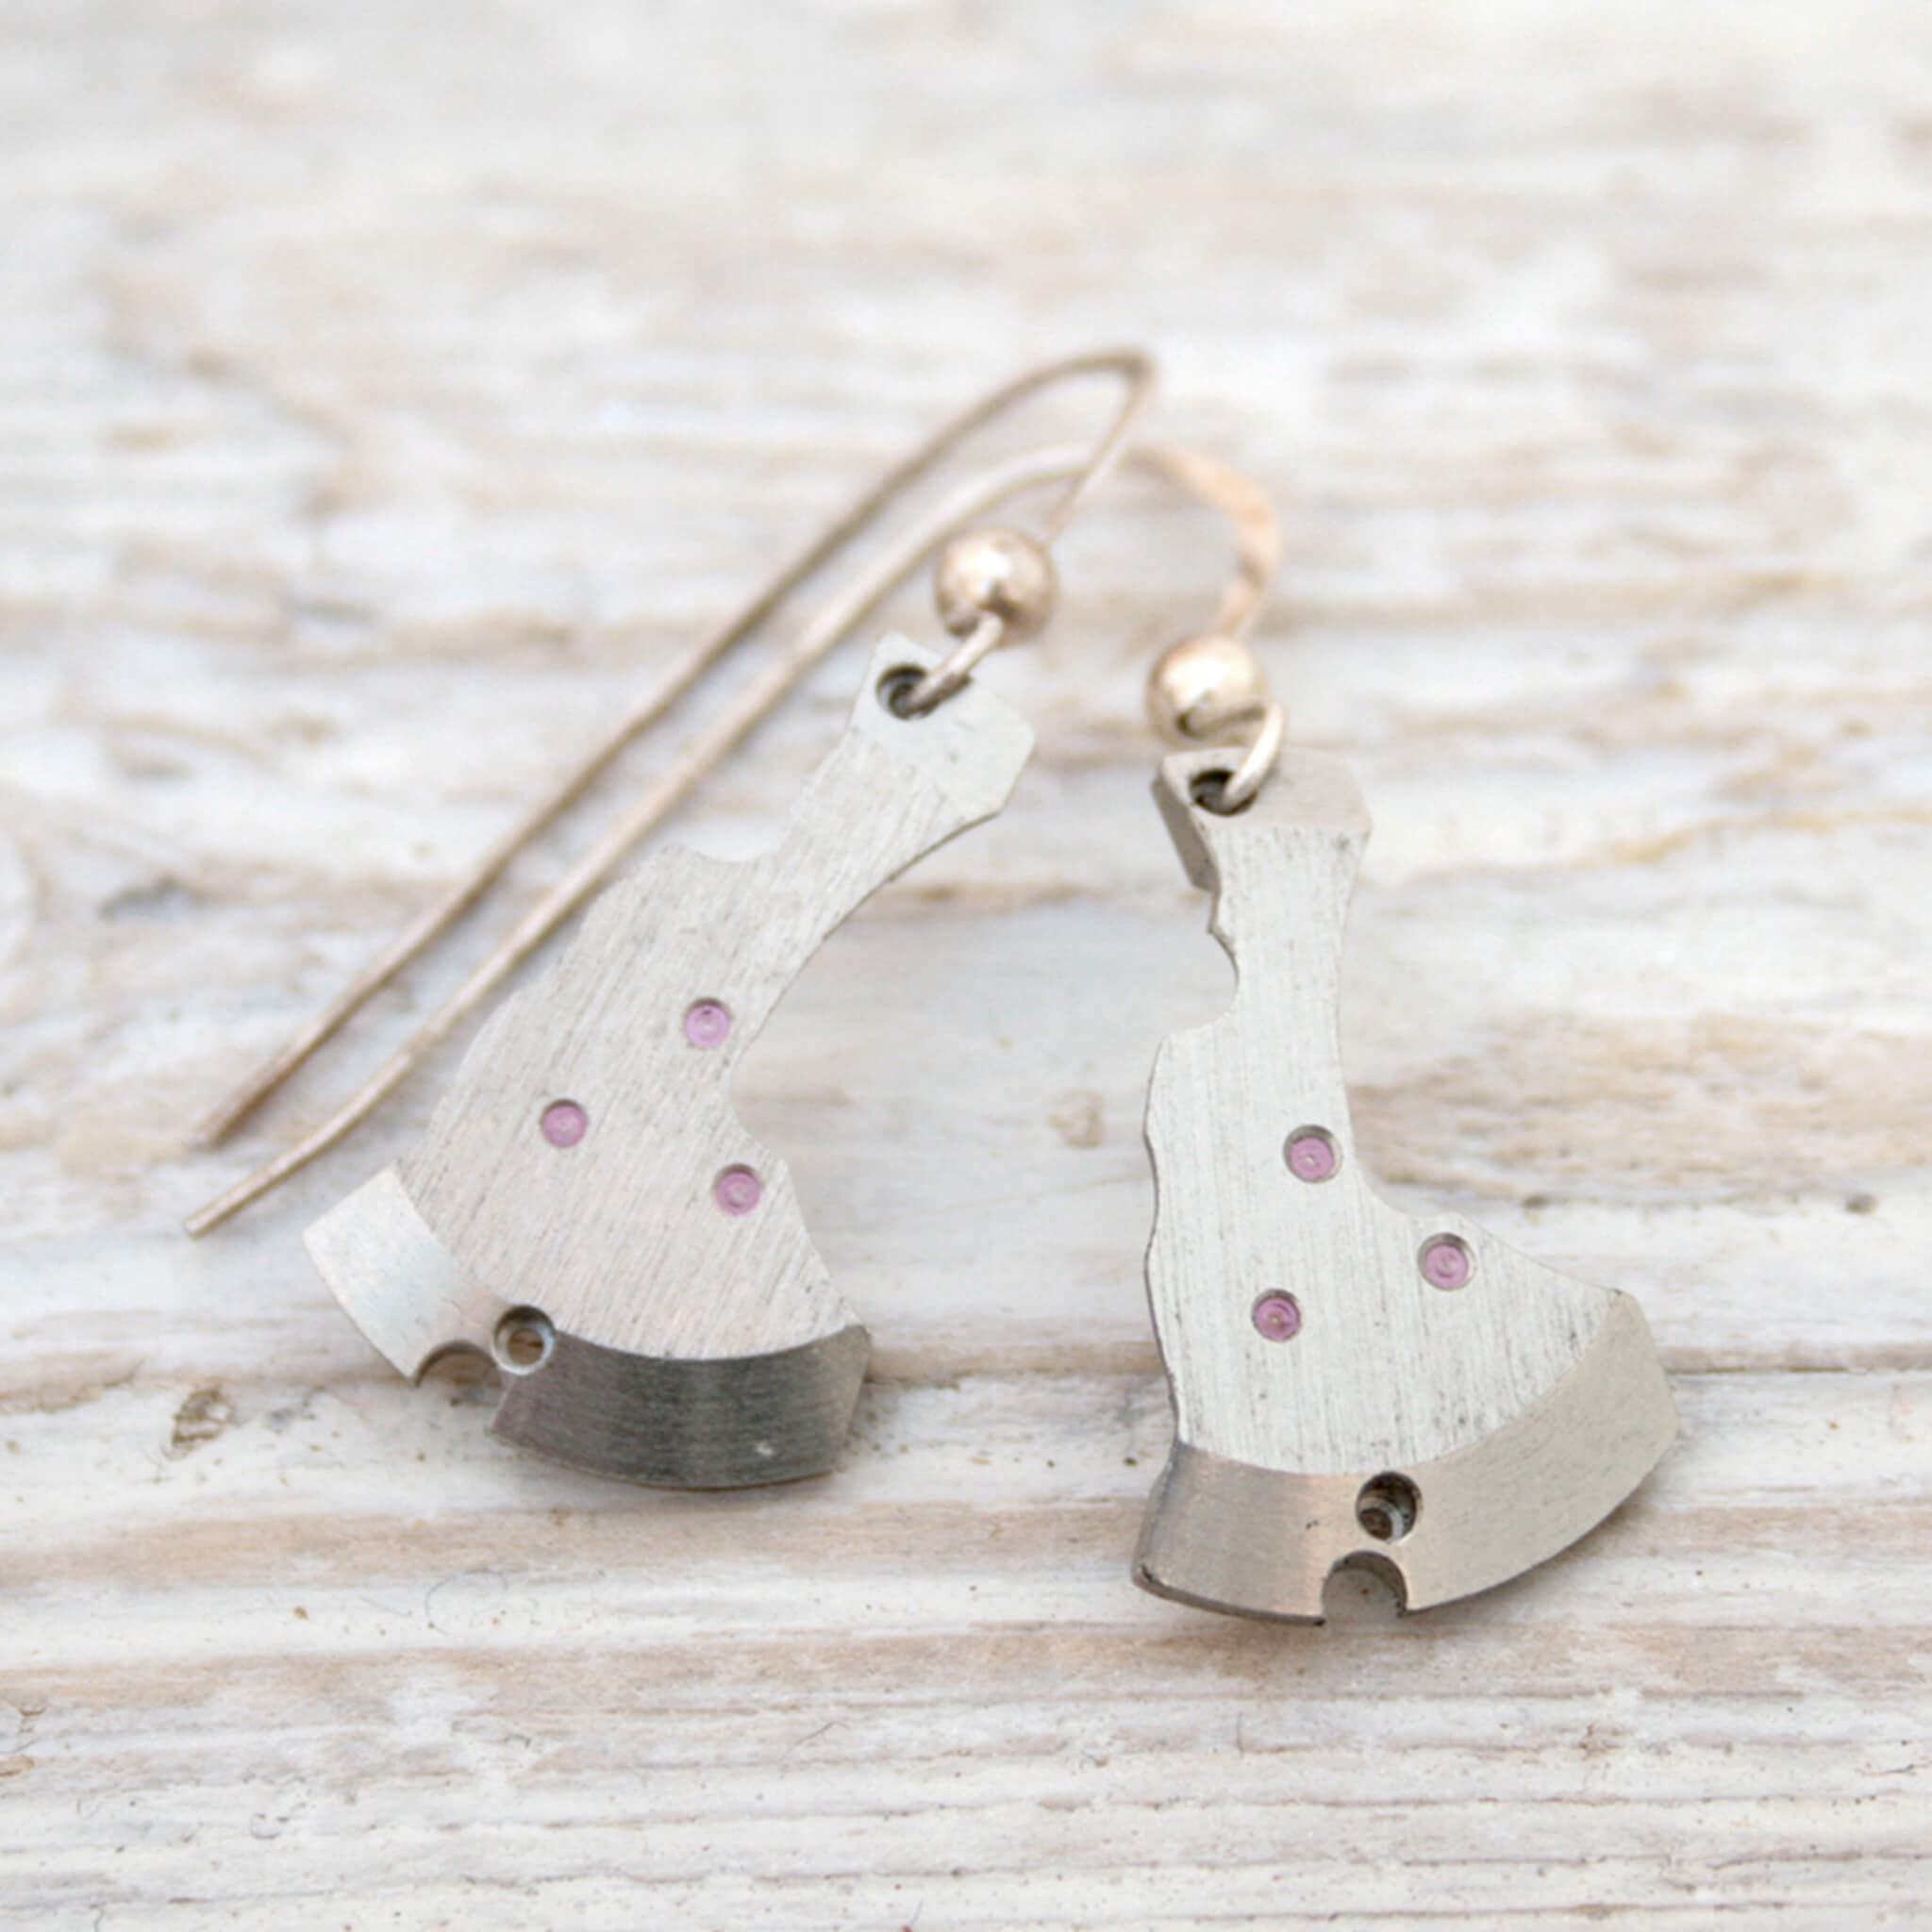 watch parts turned into dangling earrings lying on a wood painted white